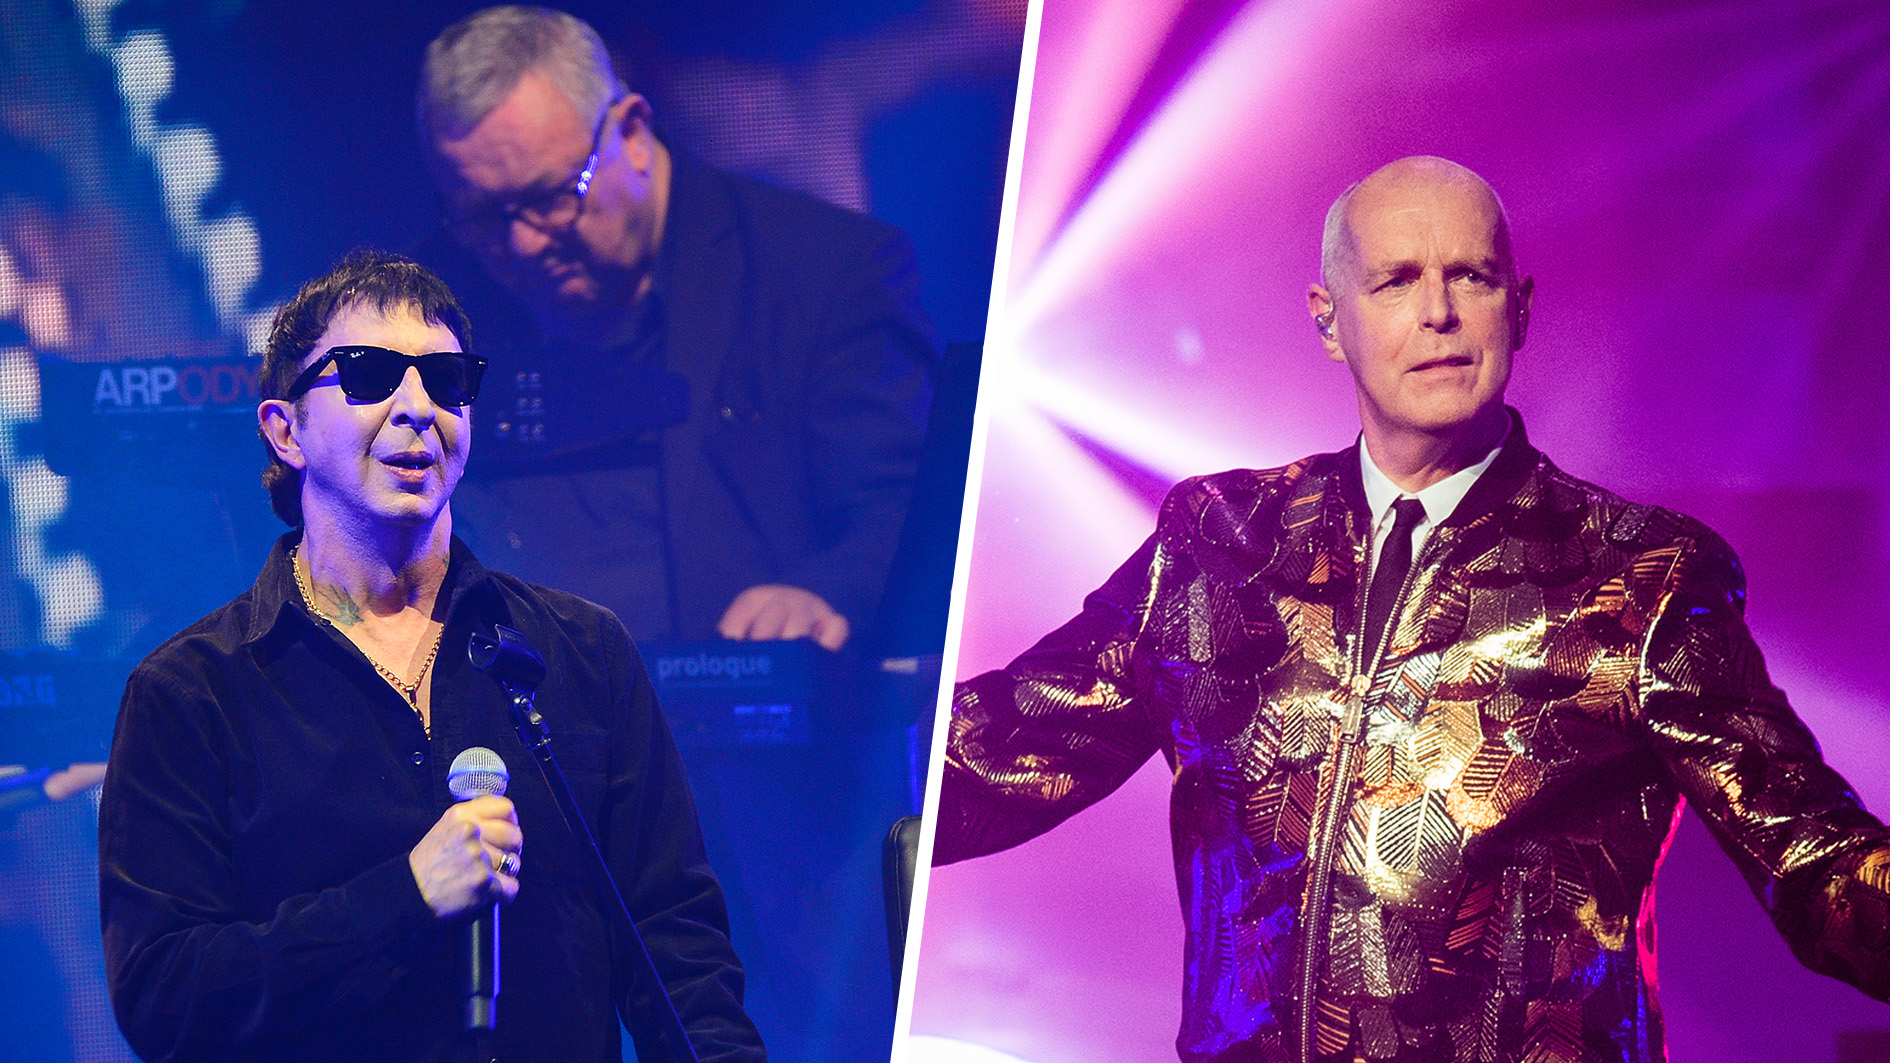 Munich, Germany. 14th May, 2022. The Pet Shop Boys are on stage at